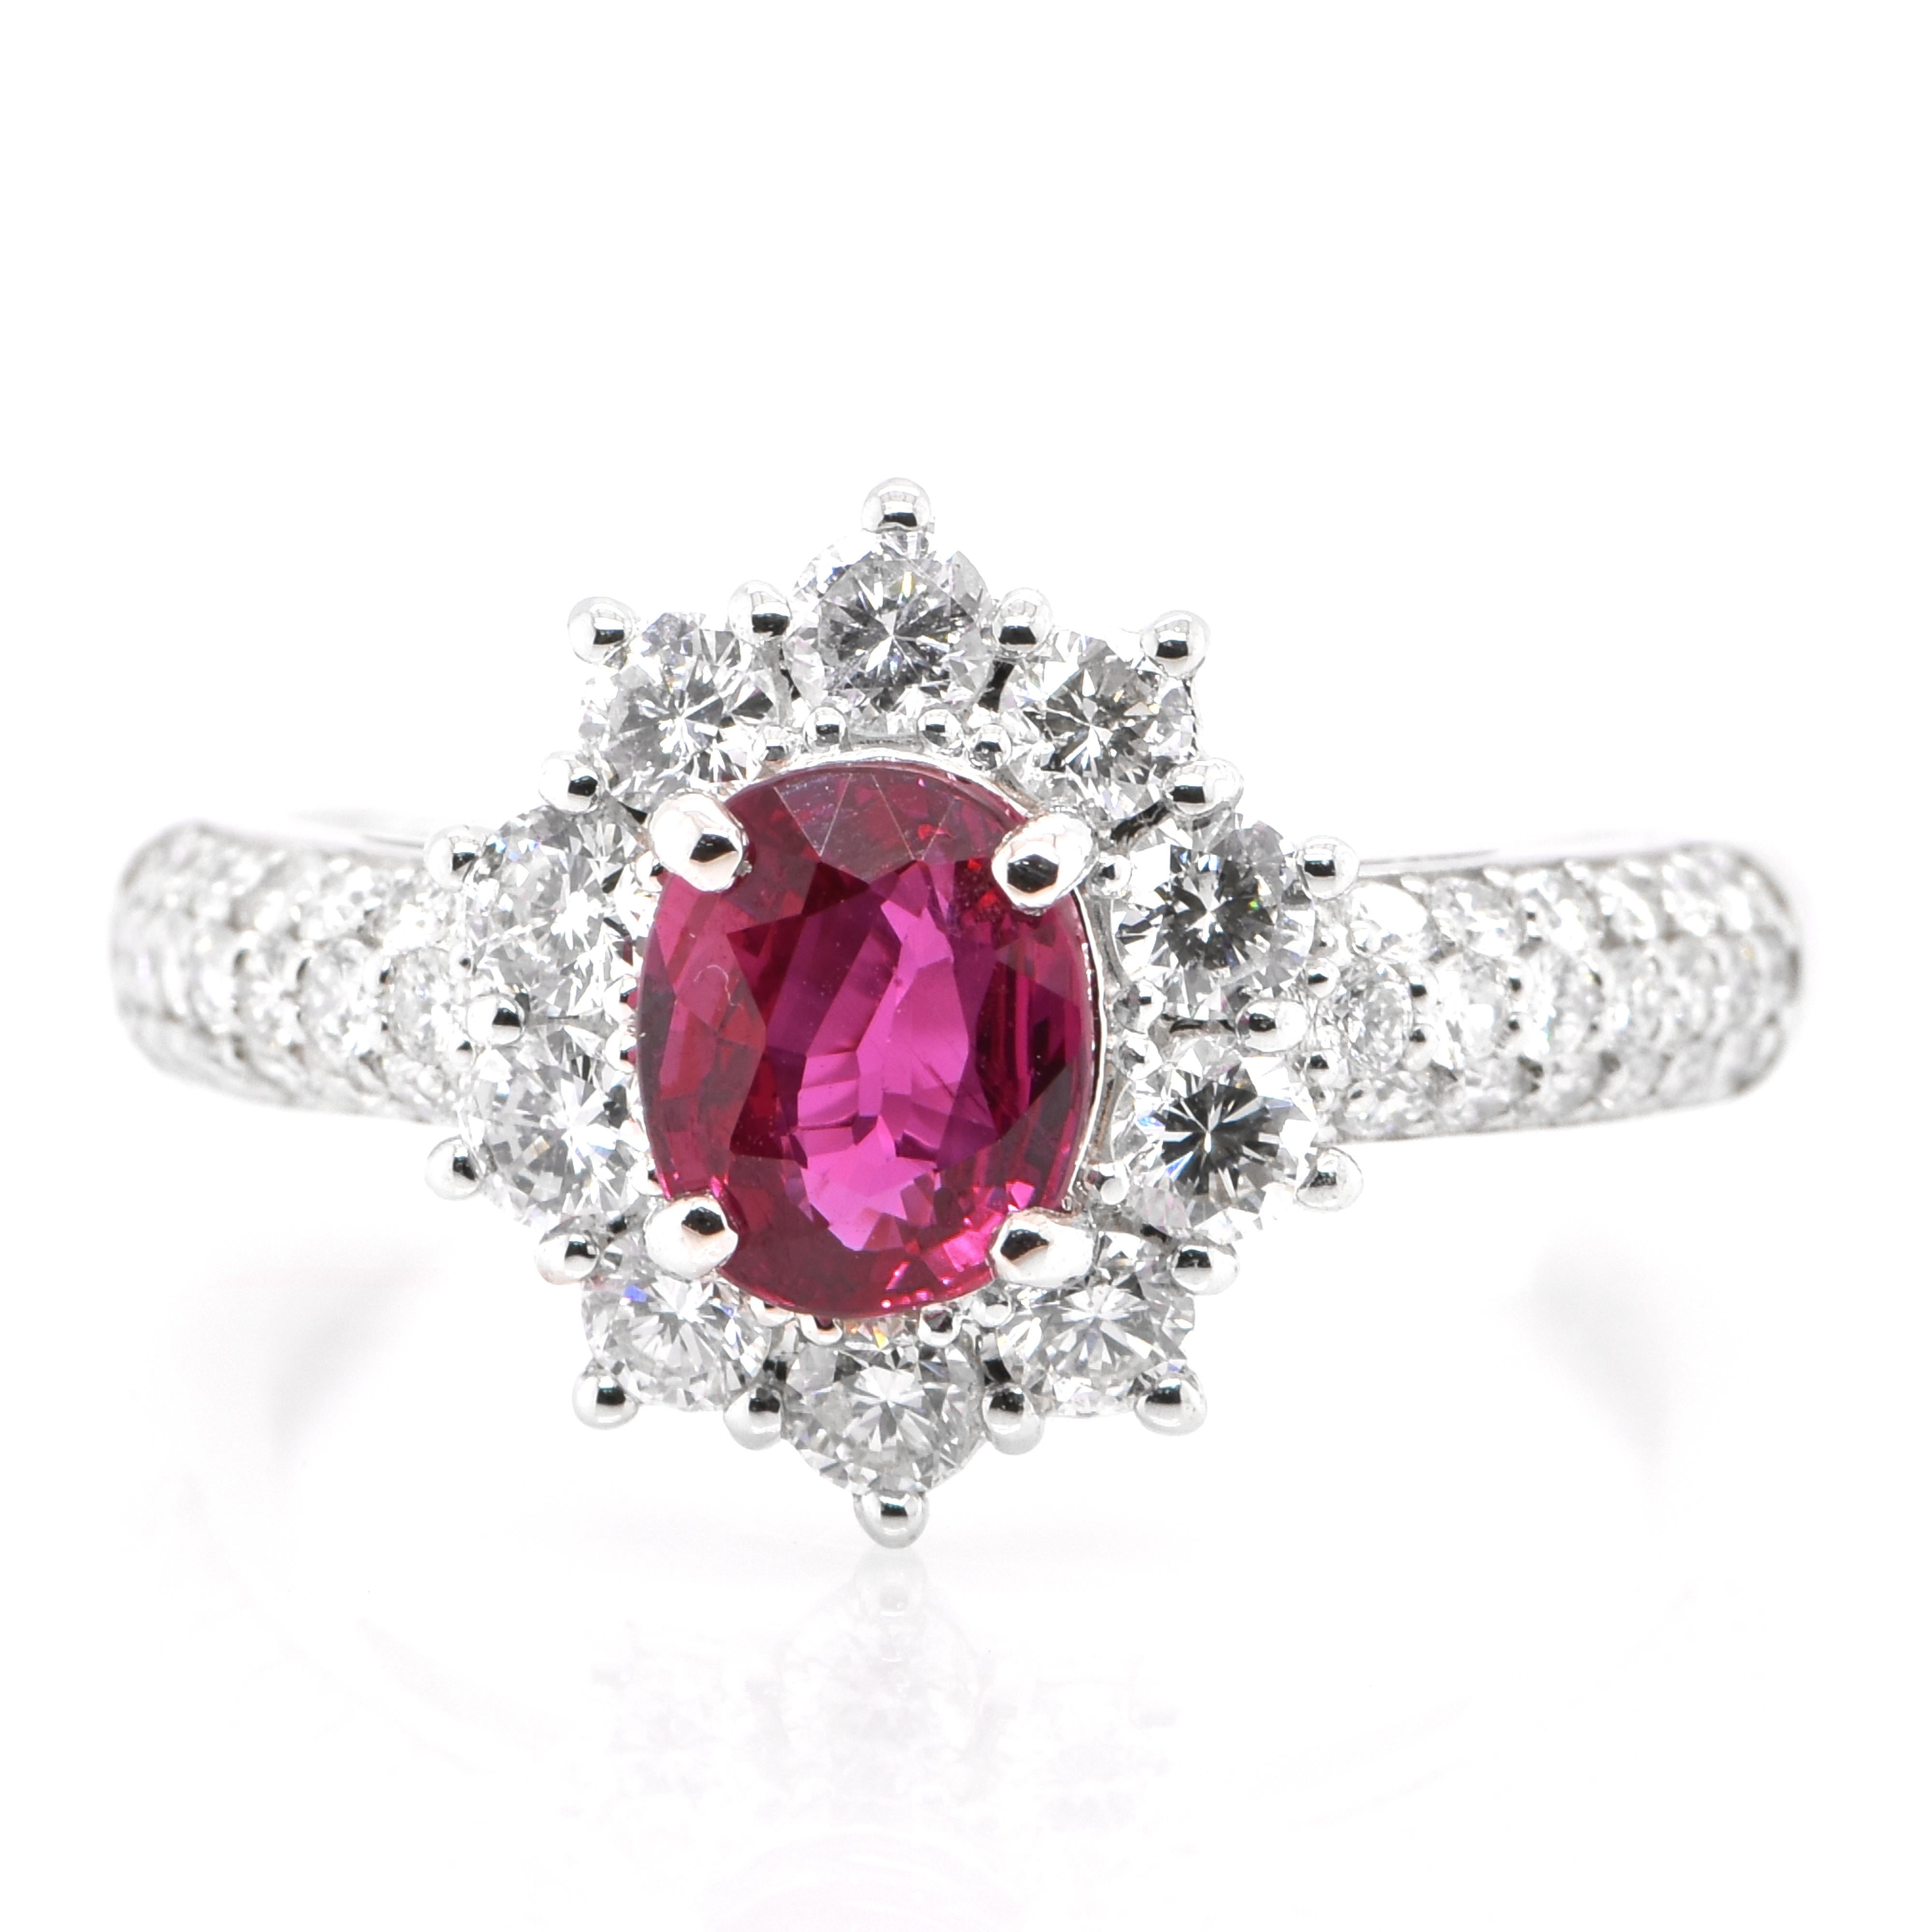 A beautiful ring set in Platinum featuring 1.077 Carats Natural Ruby and 0.73 Carat Diamonds. Rubies are referred to as 